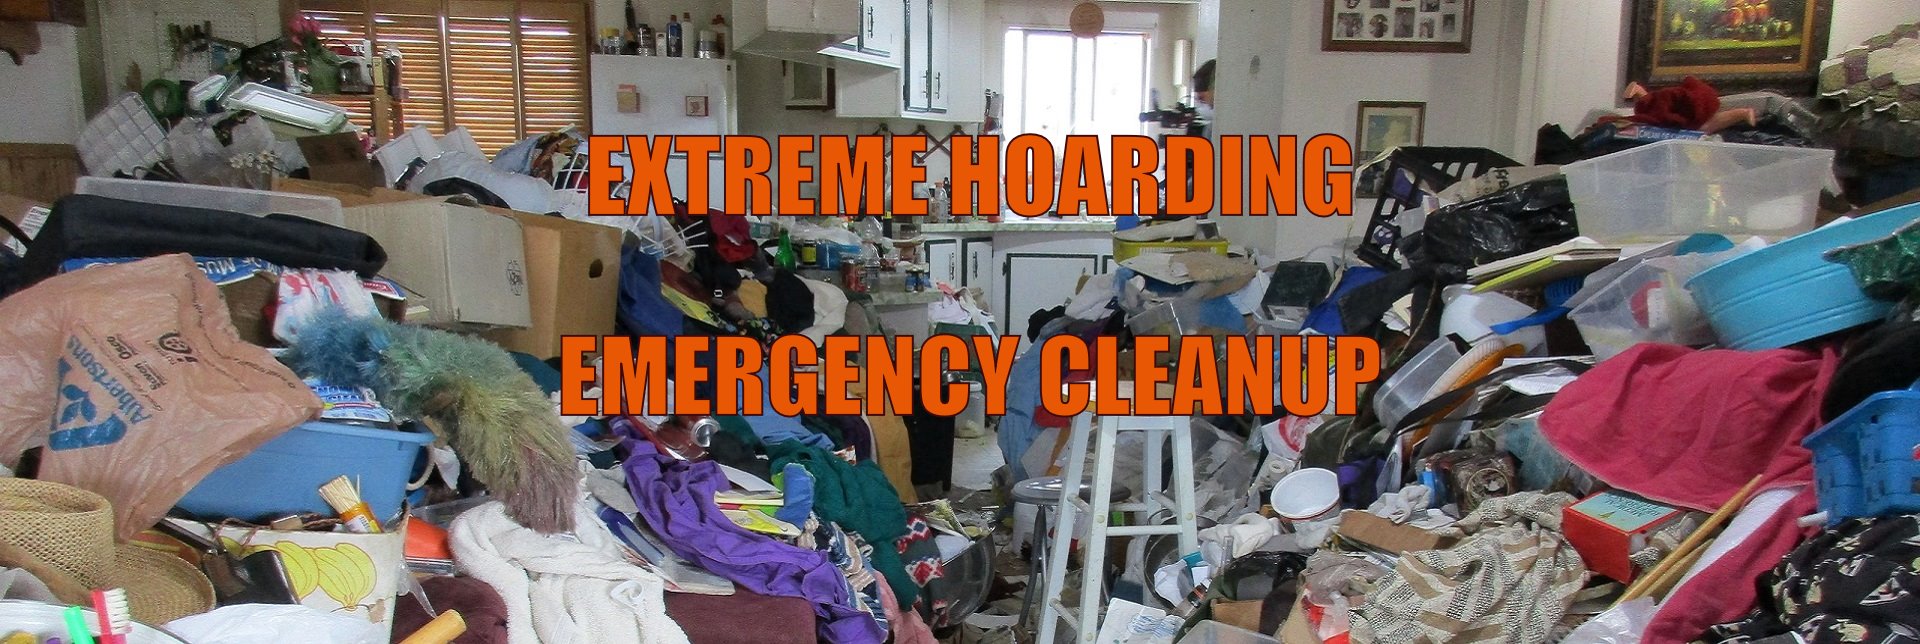 Hoarding Cleanup Services London Ontario